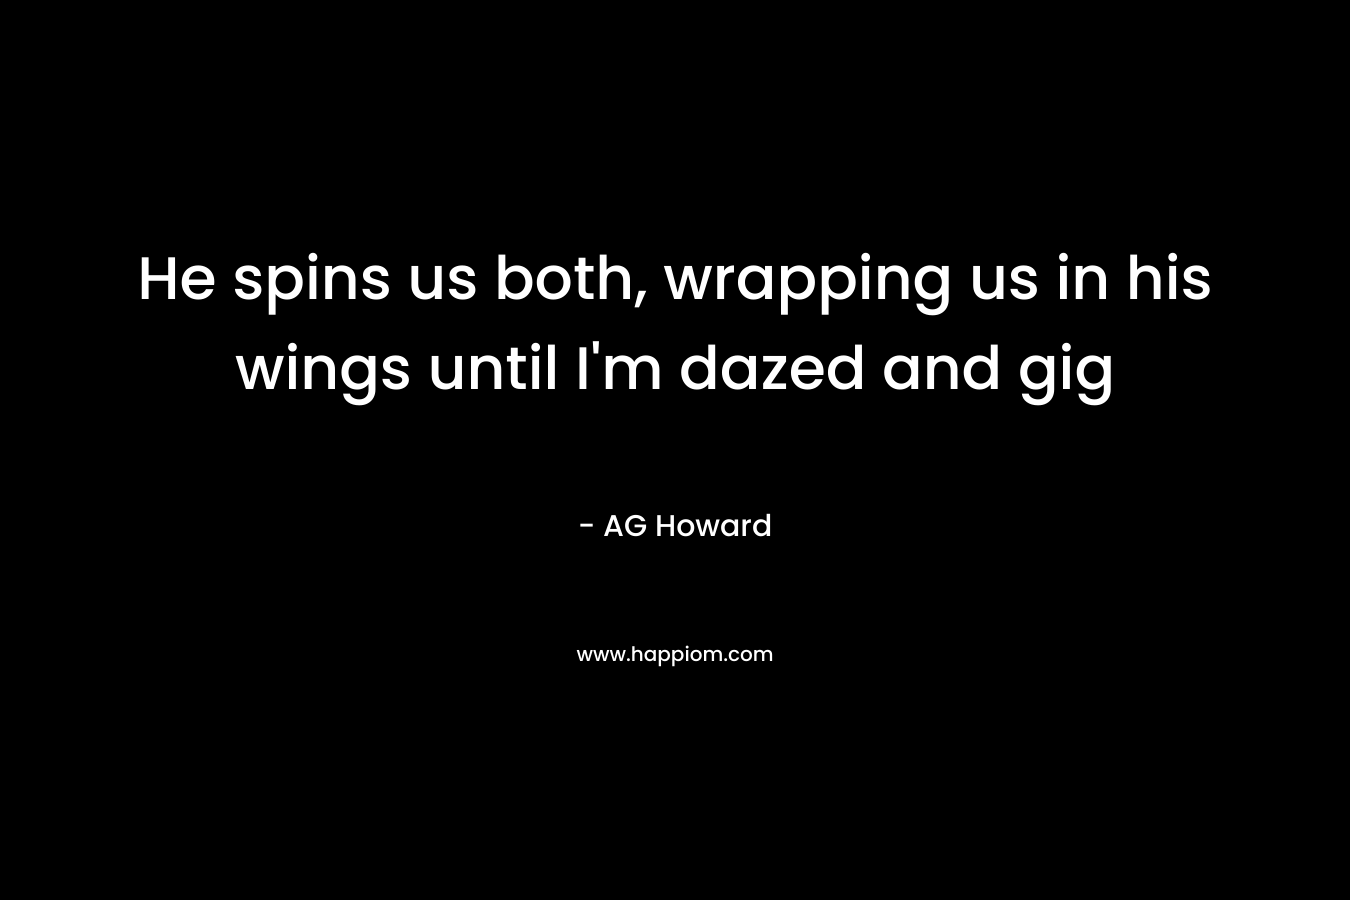 He spins us both, wrapping us in his wings until I'm dazed and gig